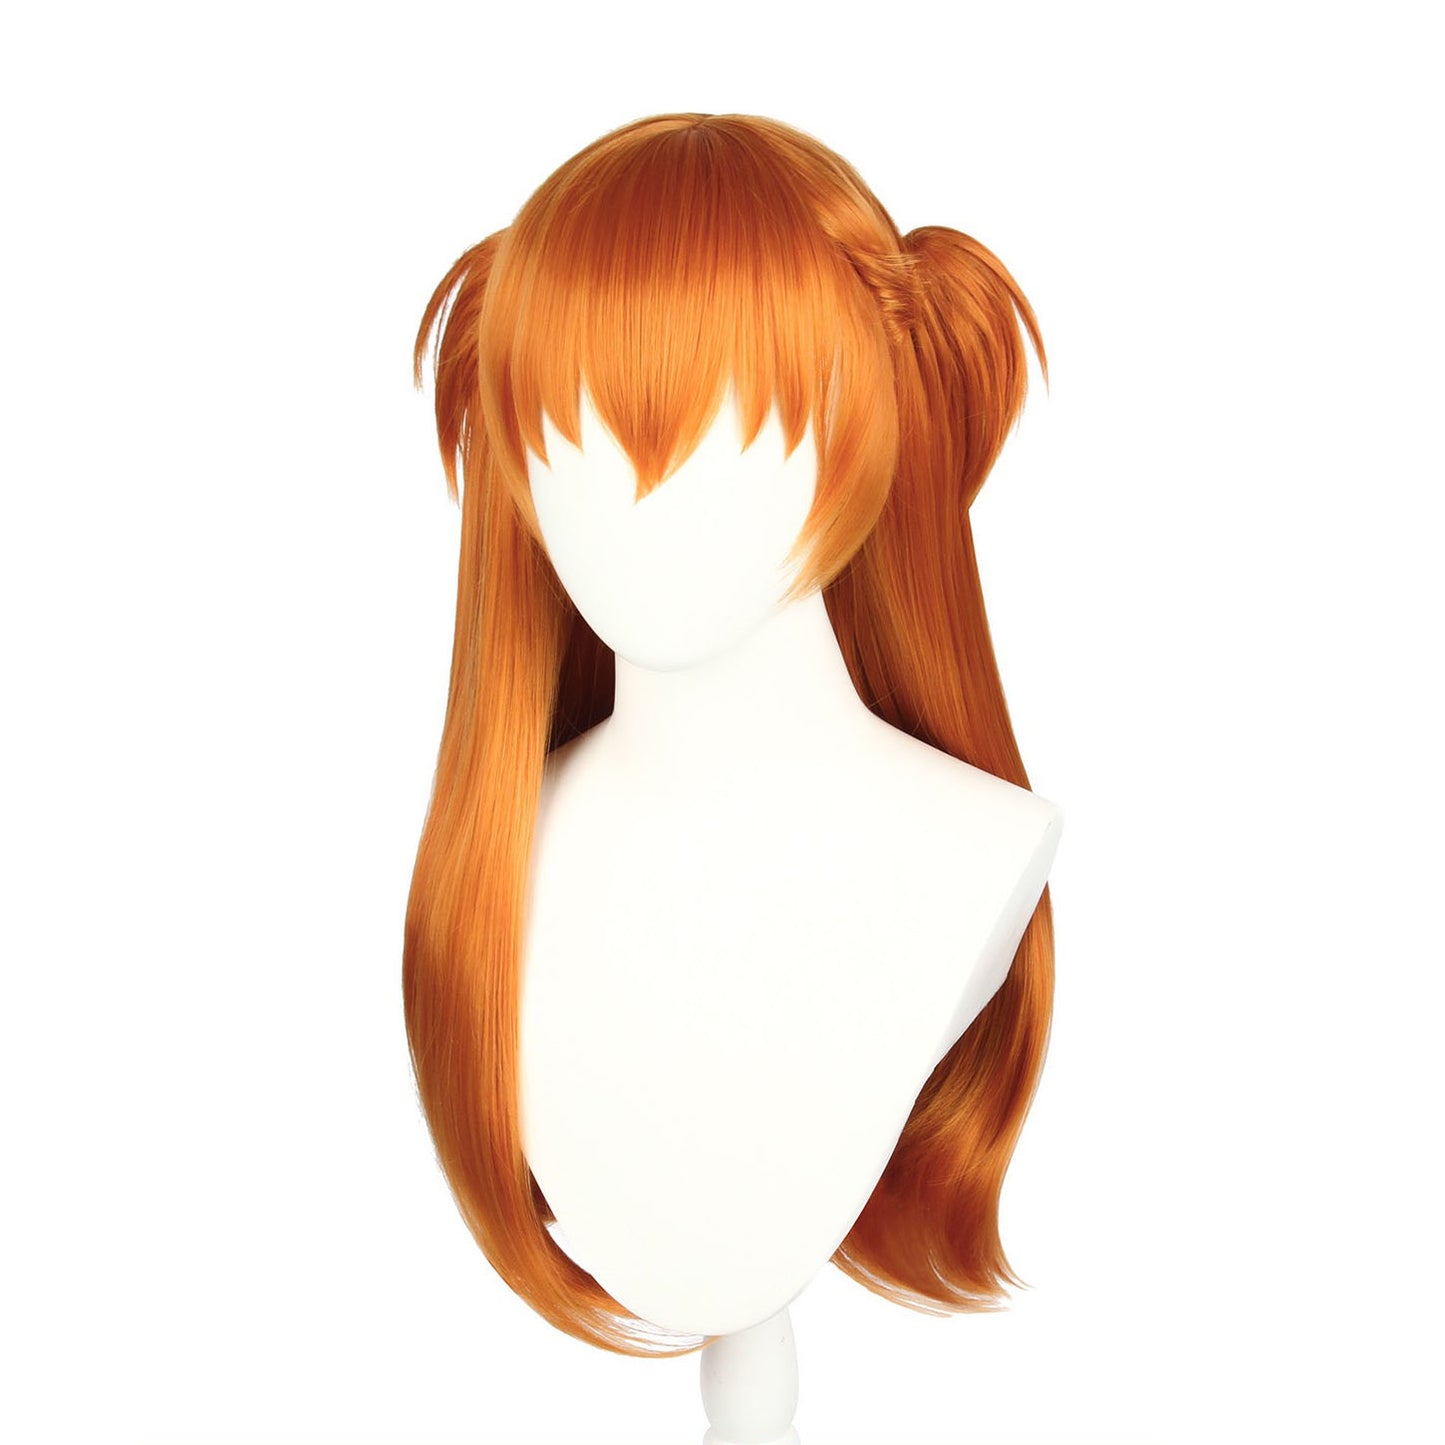 Embody the Fiery Spirit of Asuka Langley Soryu with Our Cosplay Wig - Morojowig